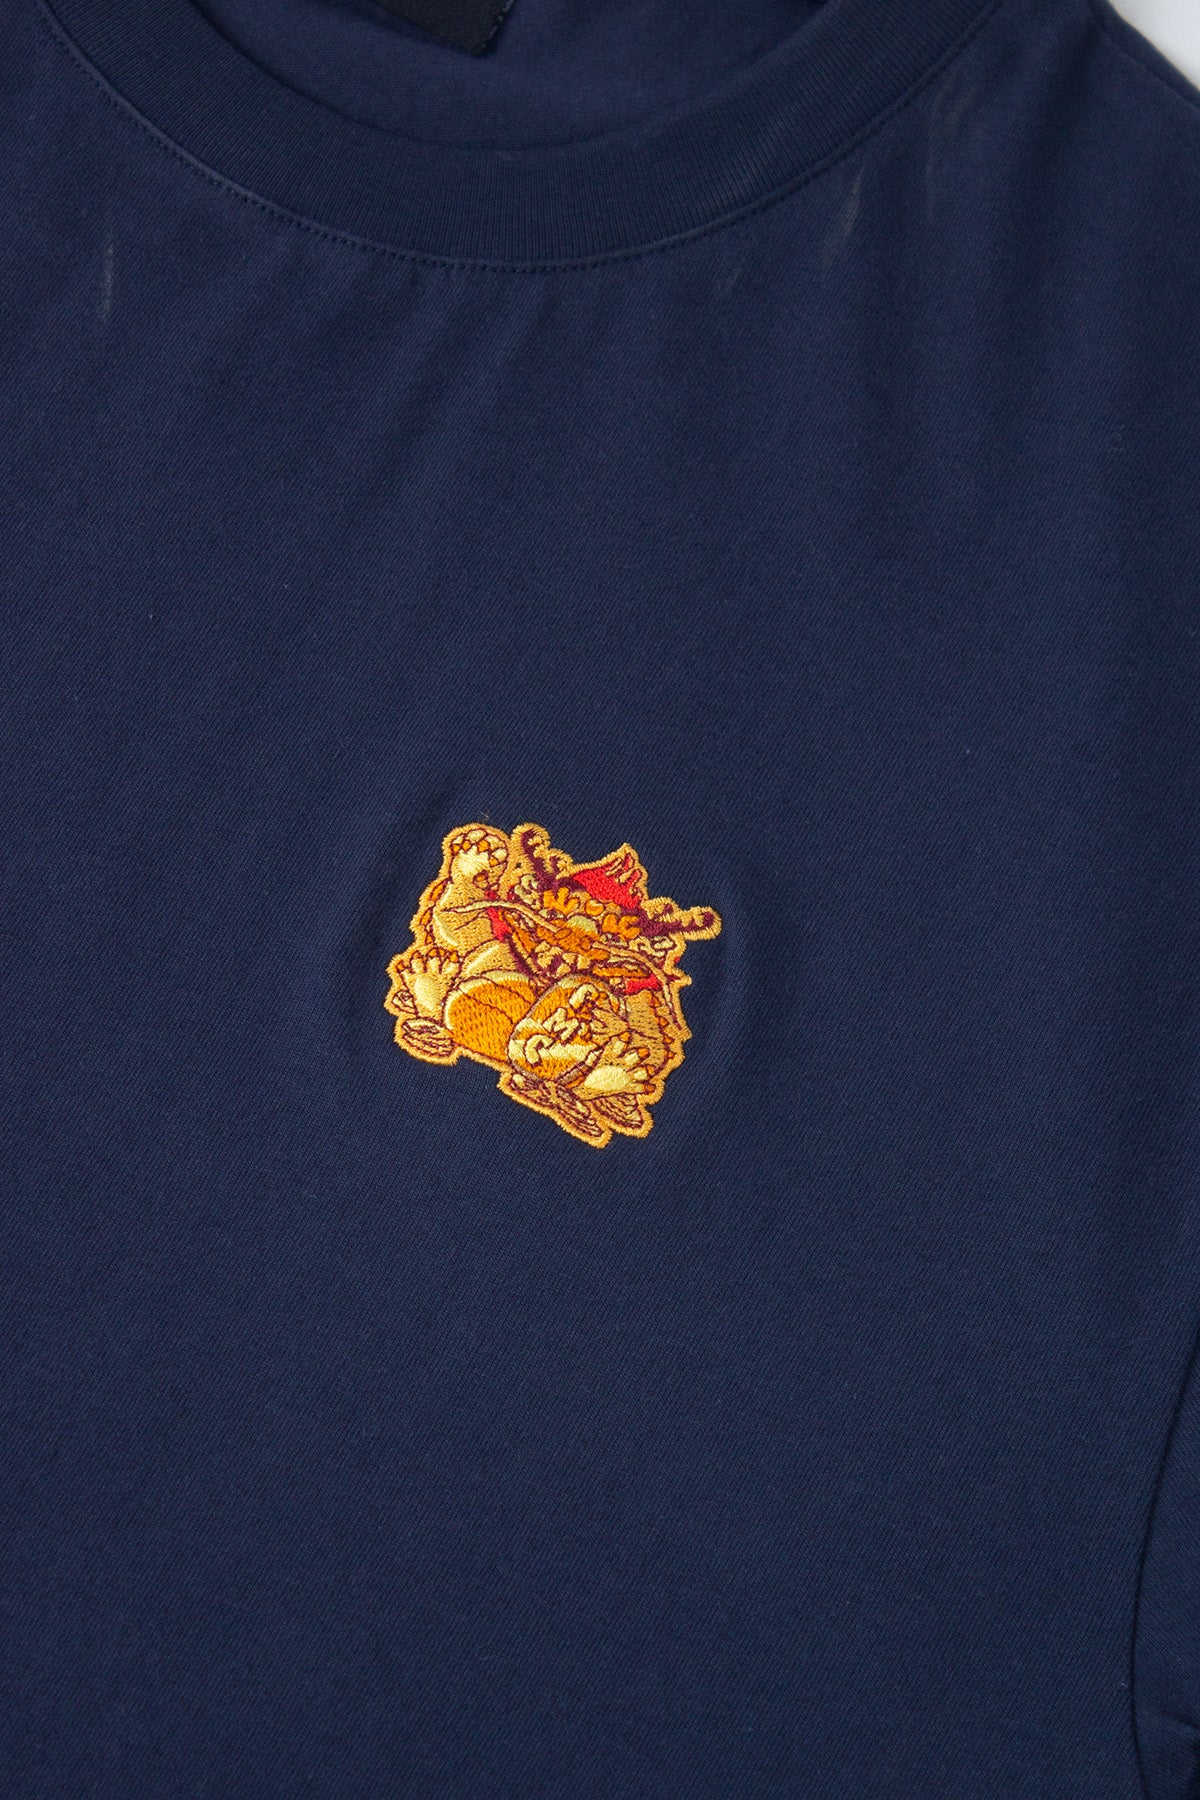 Embroidered Money Dragon Tee Navy Blue